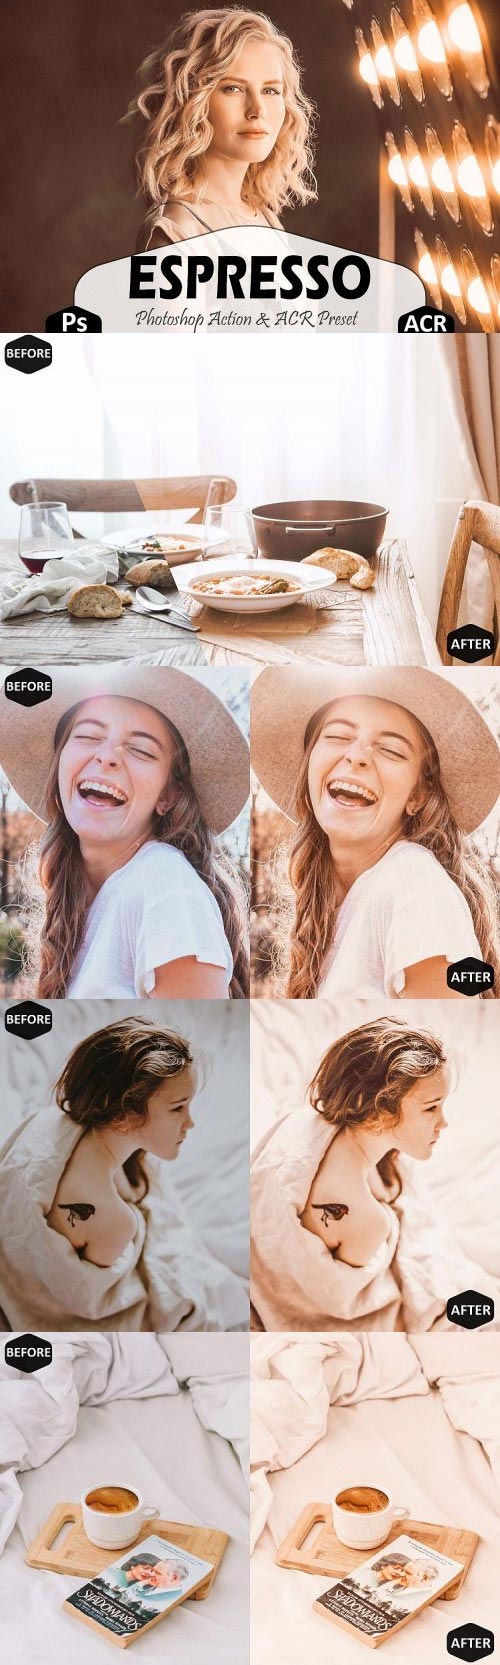 Espresso Photoshop Actions And ACR Presets, Brown Ps preset